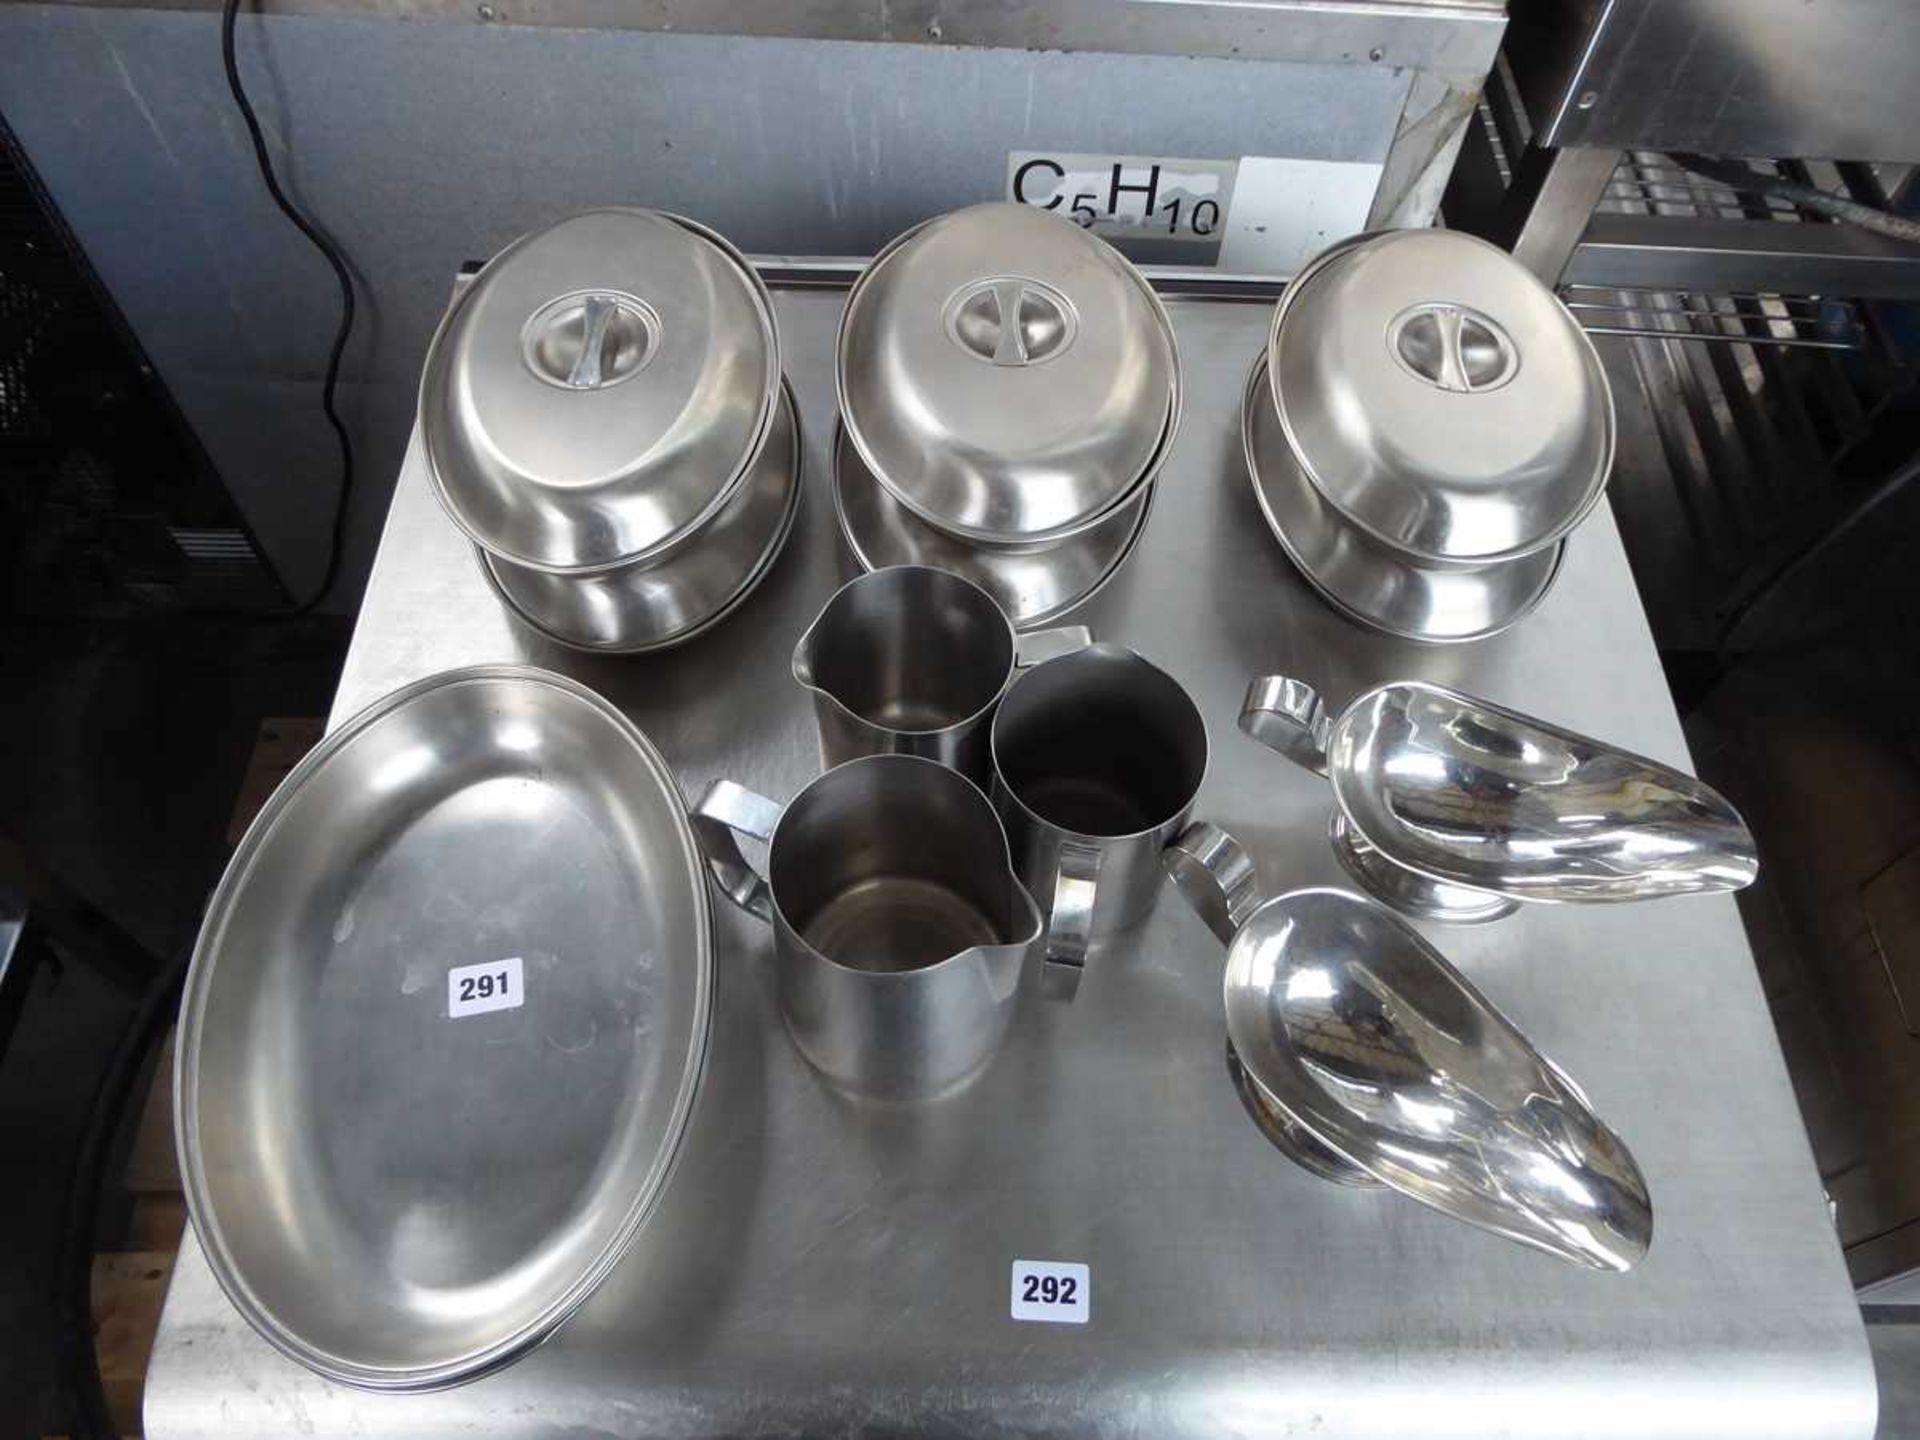 Table top of assorted stainless steel oval dishes, some with lids, gravies and creamers